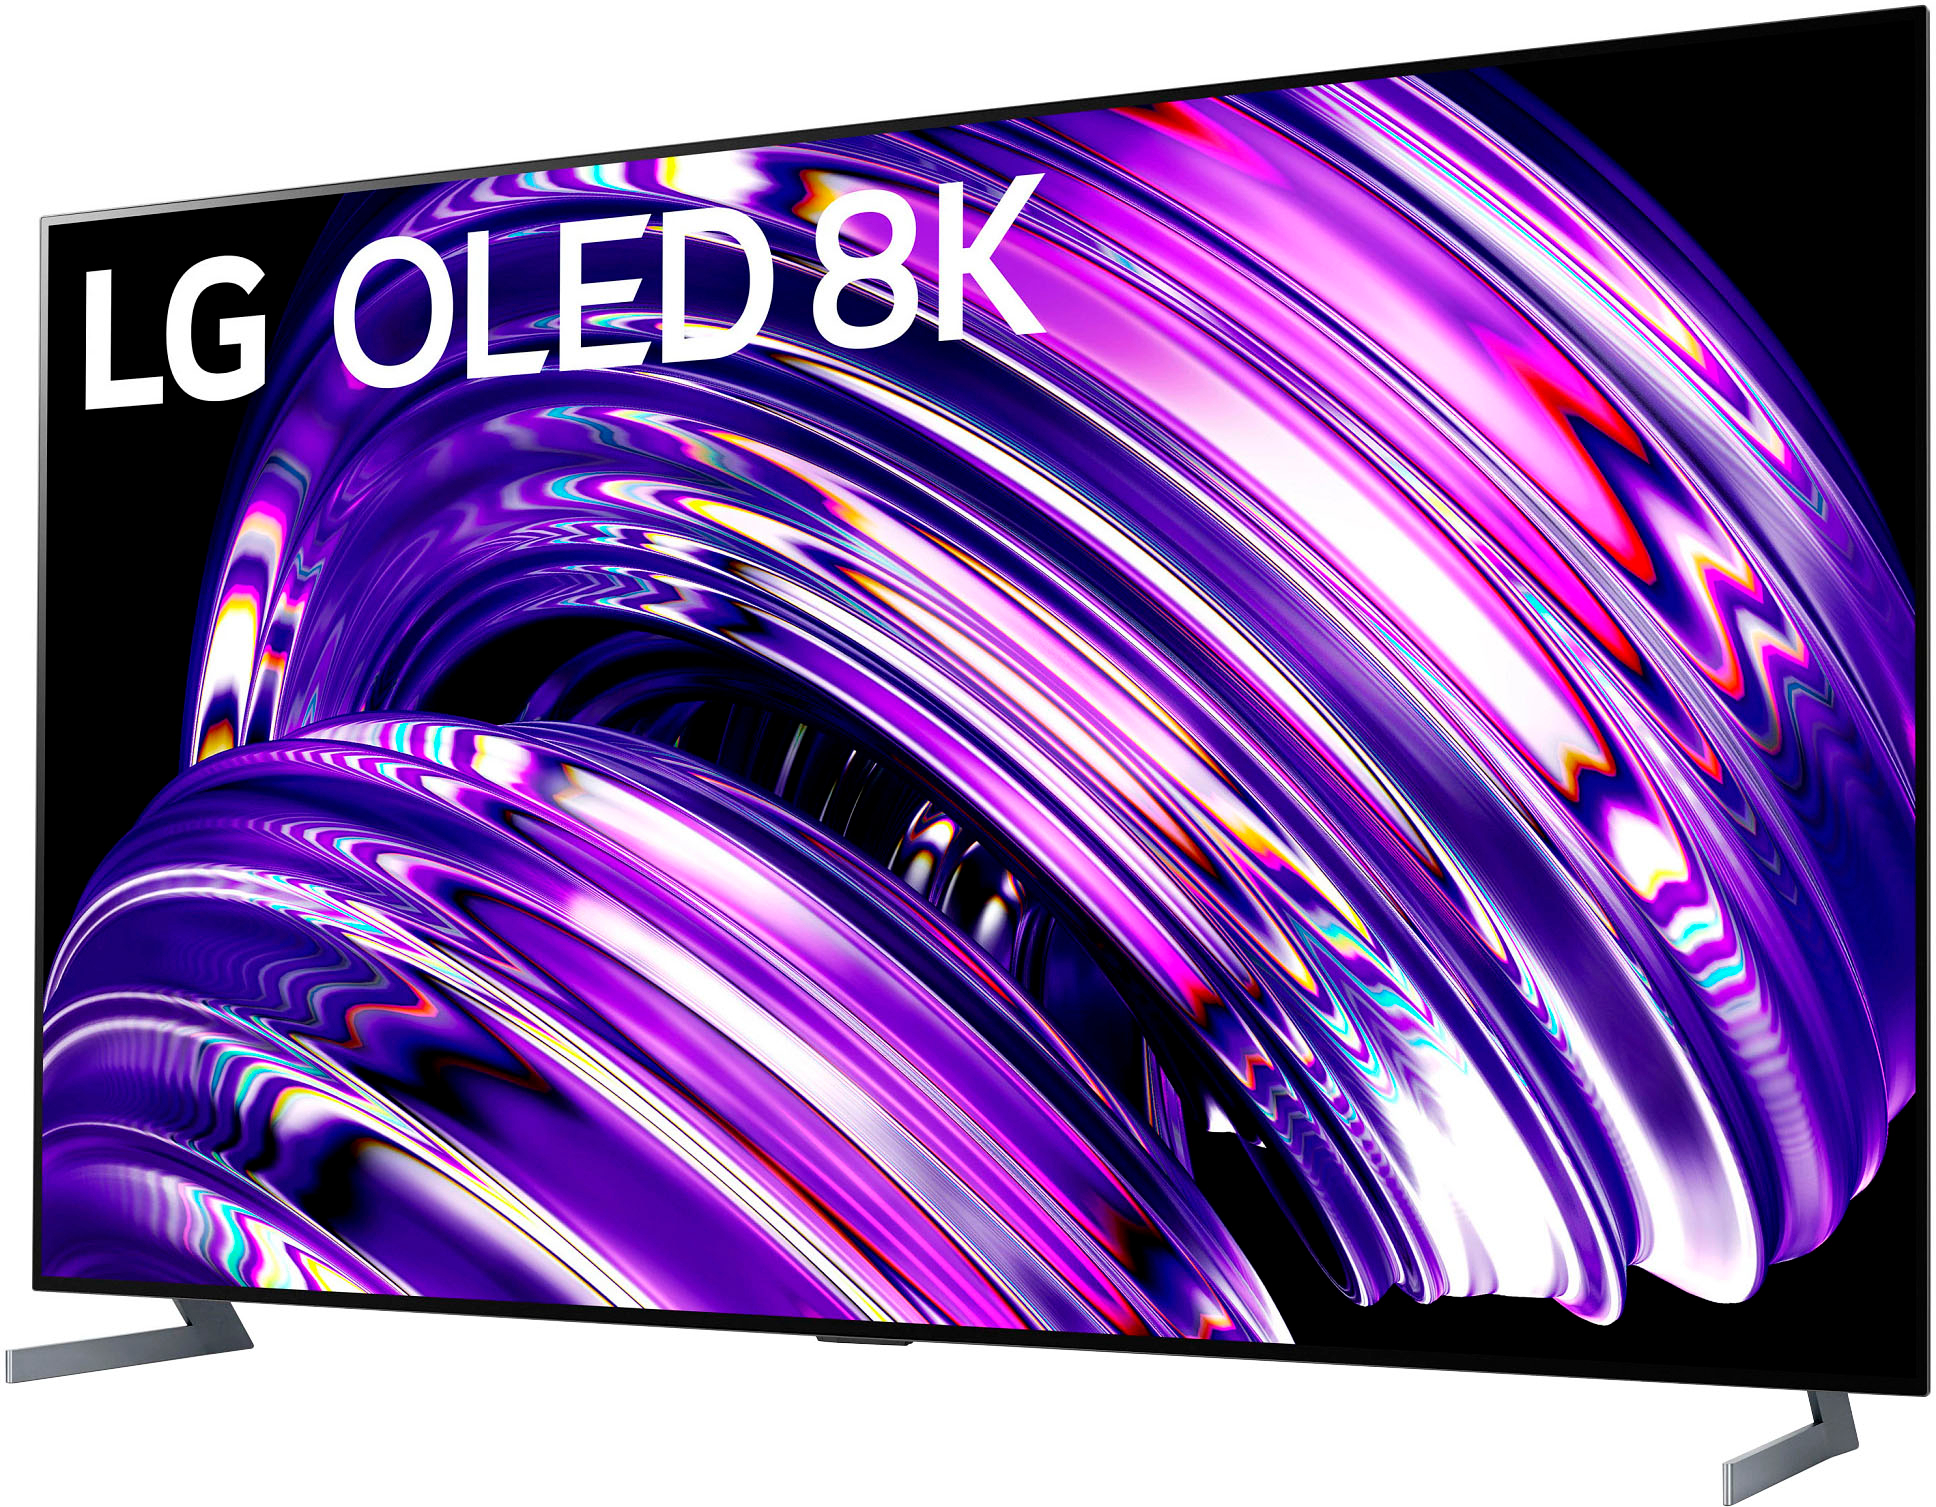 Back View: LG - 77" Class G1 Series OLED evo 4K UHD Smart webOS TV with Gallery Design